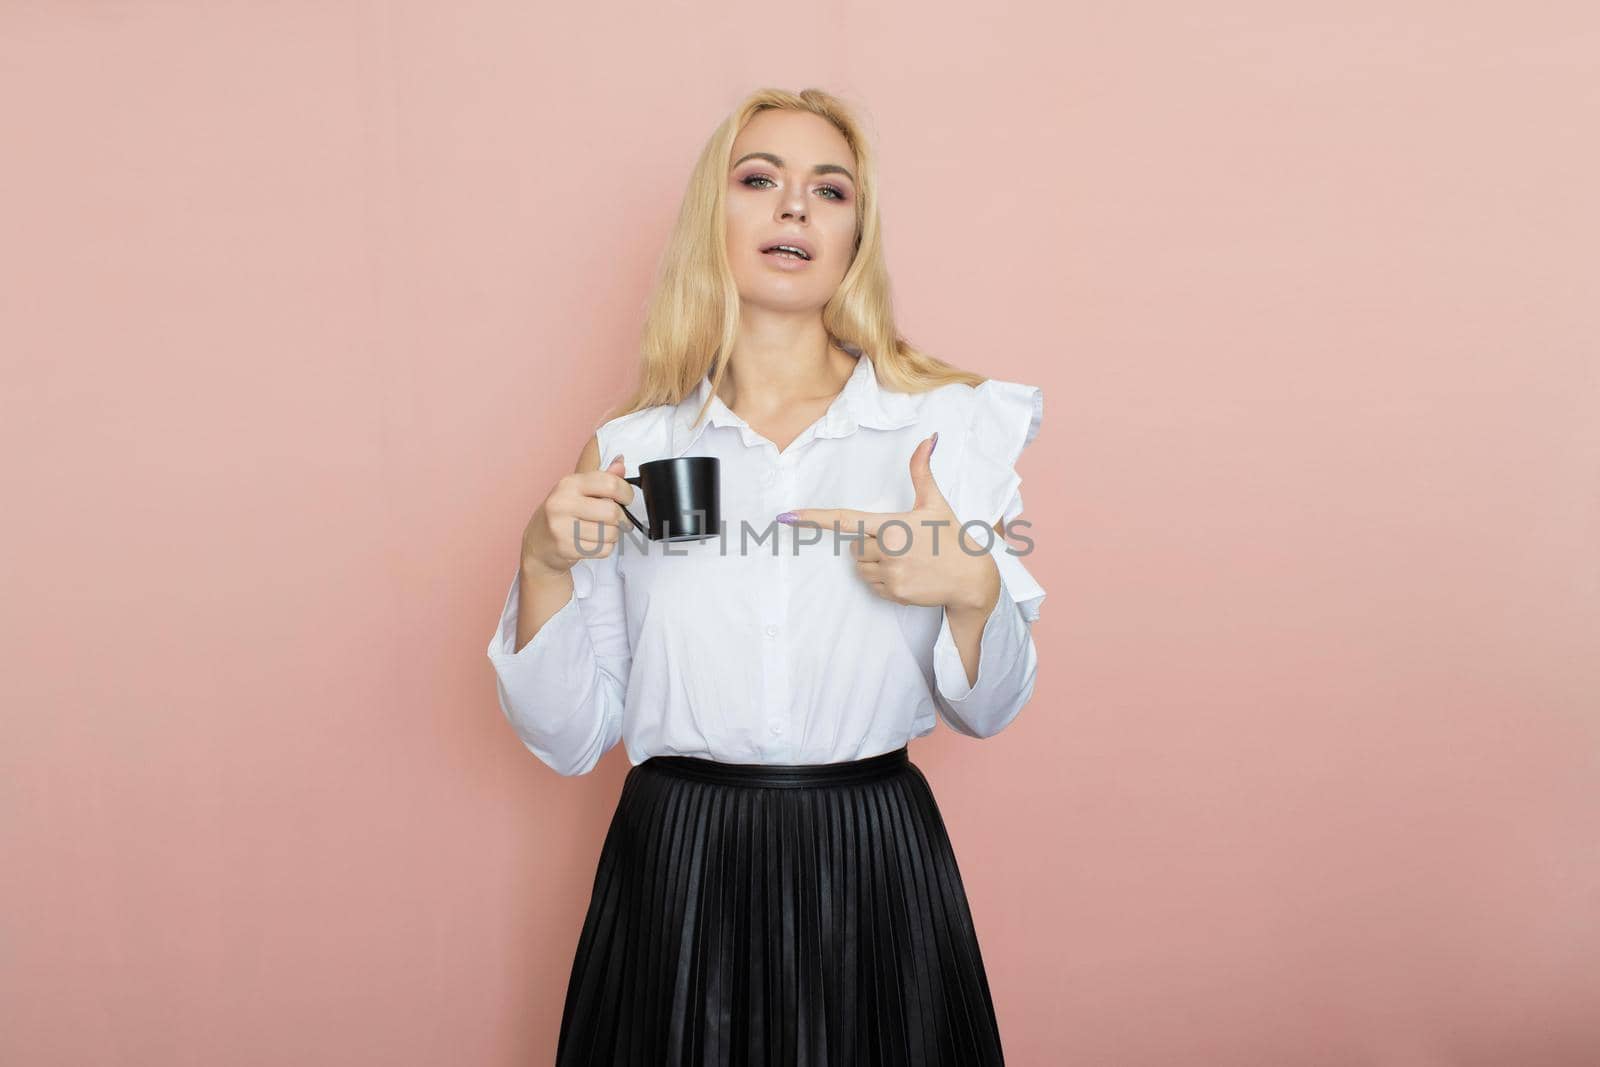 Beauty, fashion portrait. Elegant business style. Portrait of a beautiful blonde woman in white blouse and black skirt posing at studio on a pink background. Holding black cup in her hands. Drinking coffee, tea